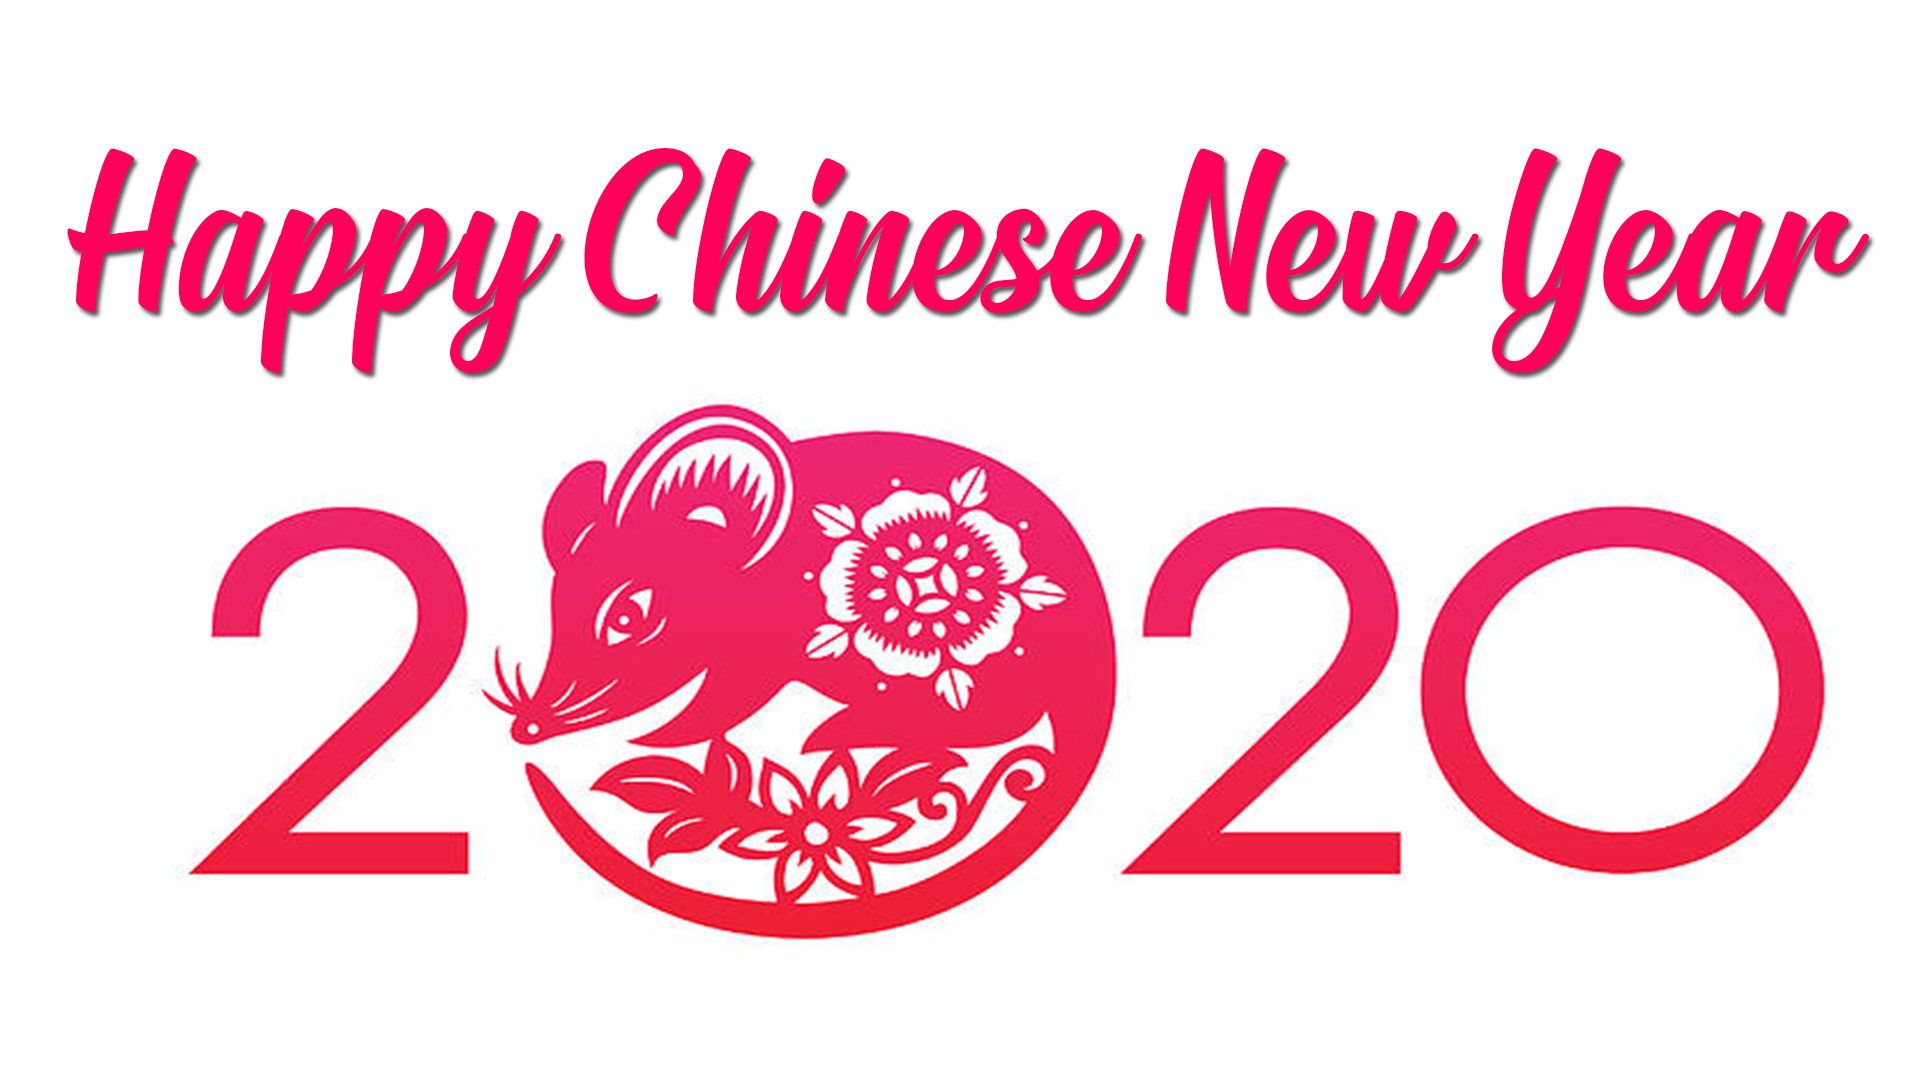 chinese new year greetings image